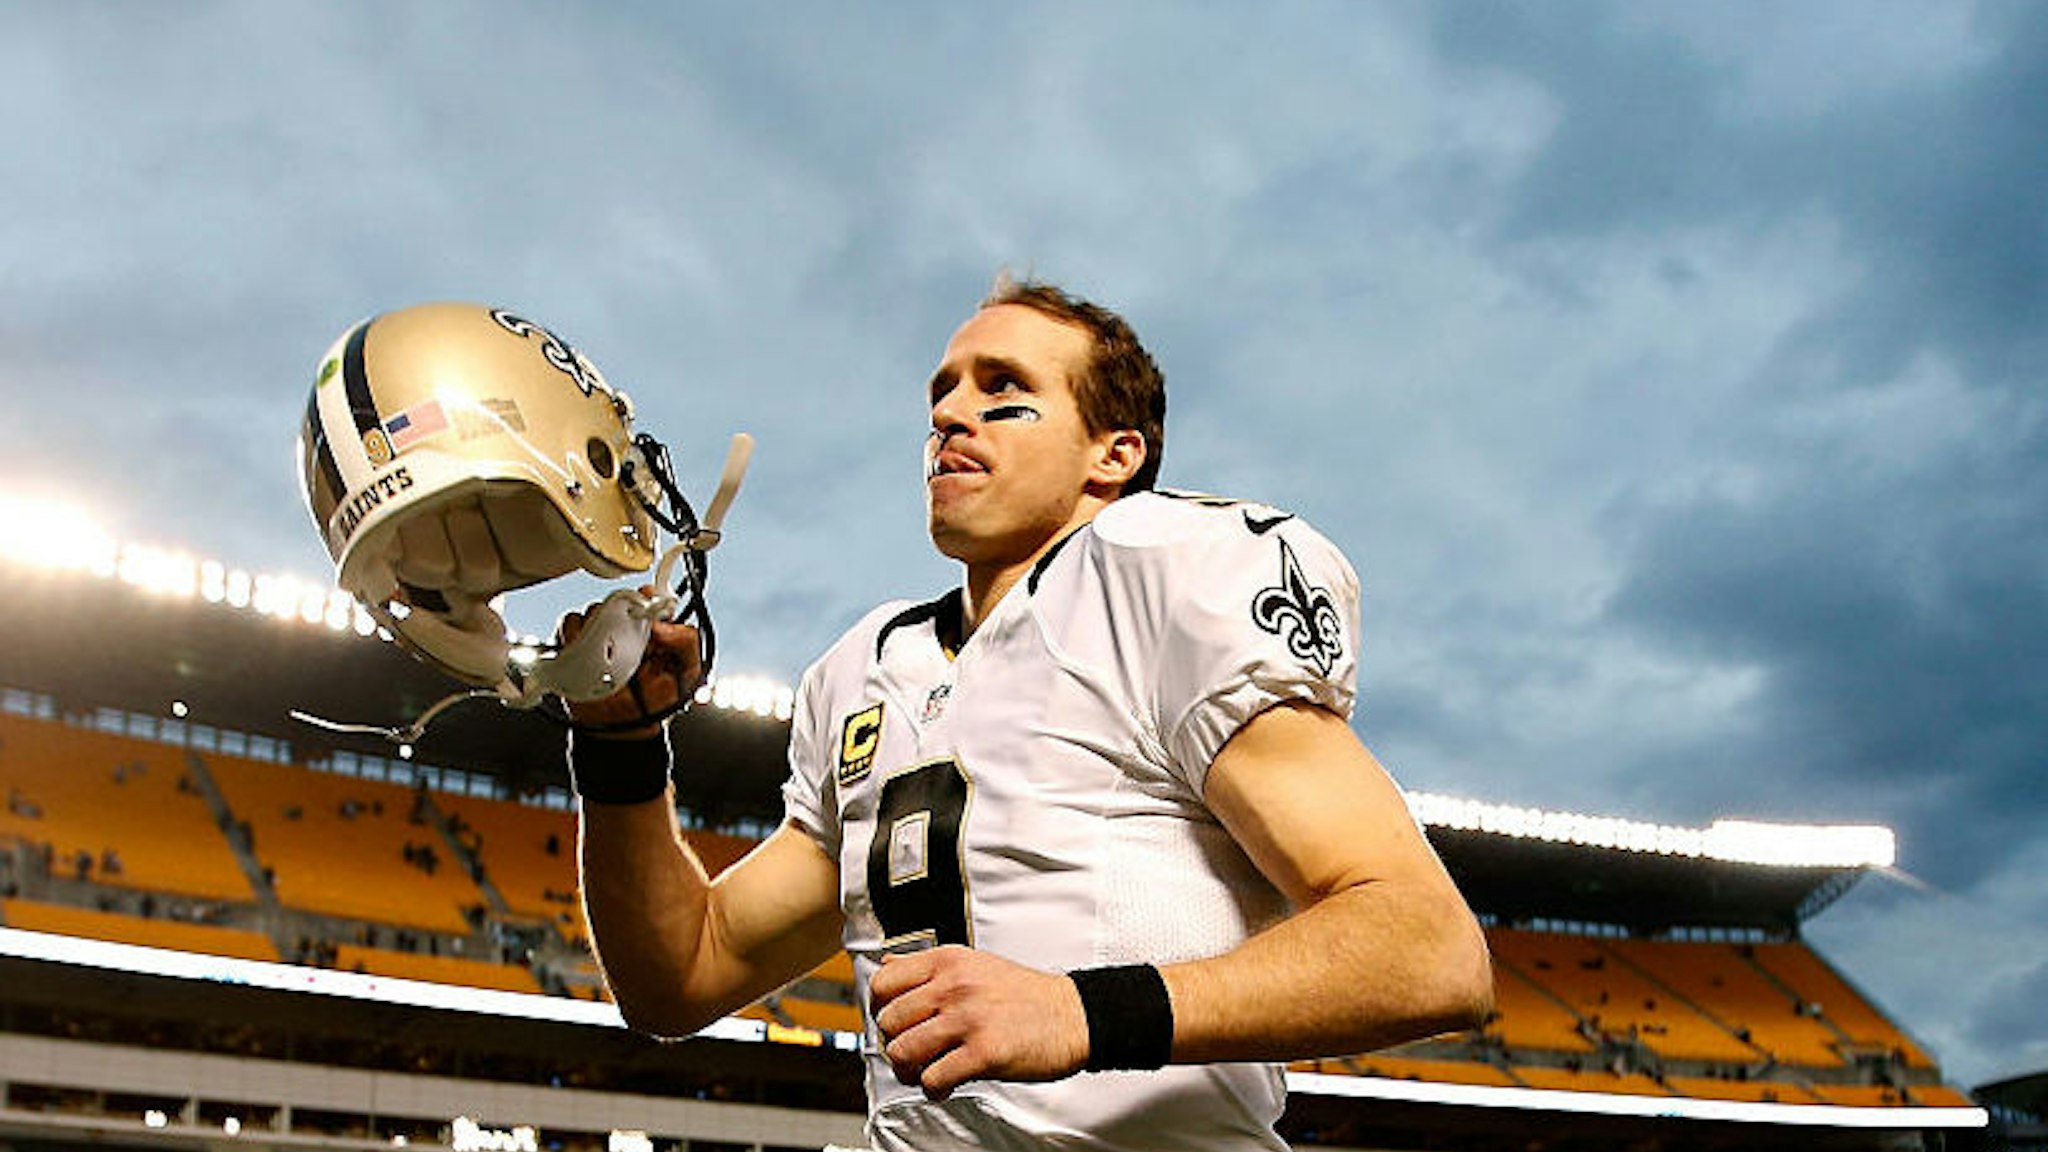 PITTSBURGH, PA - NOVEMBER 30: Drew Brees #9 of the New Orleans Saints runs off the field after a 35-32 win over the New Orleans Saints at Heinz Field on November 30, 2014 in Pittsburgh, Pennsylvania.